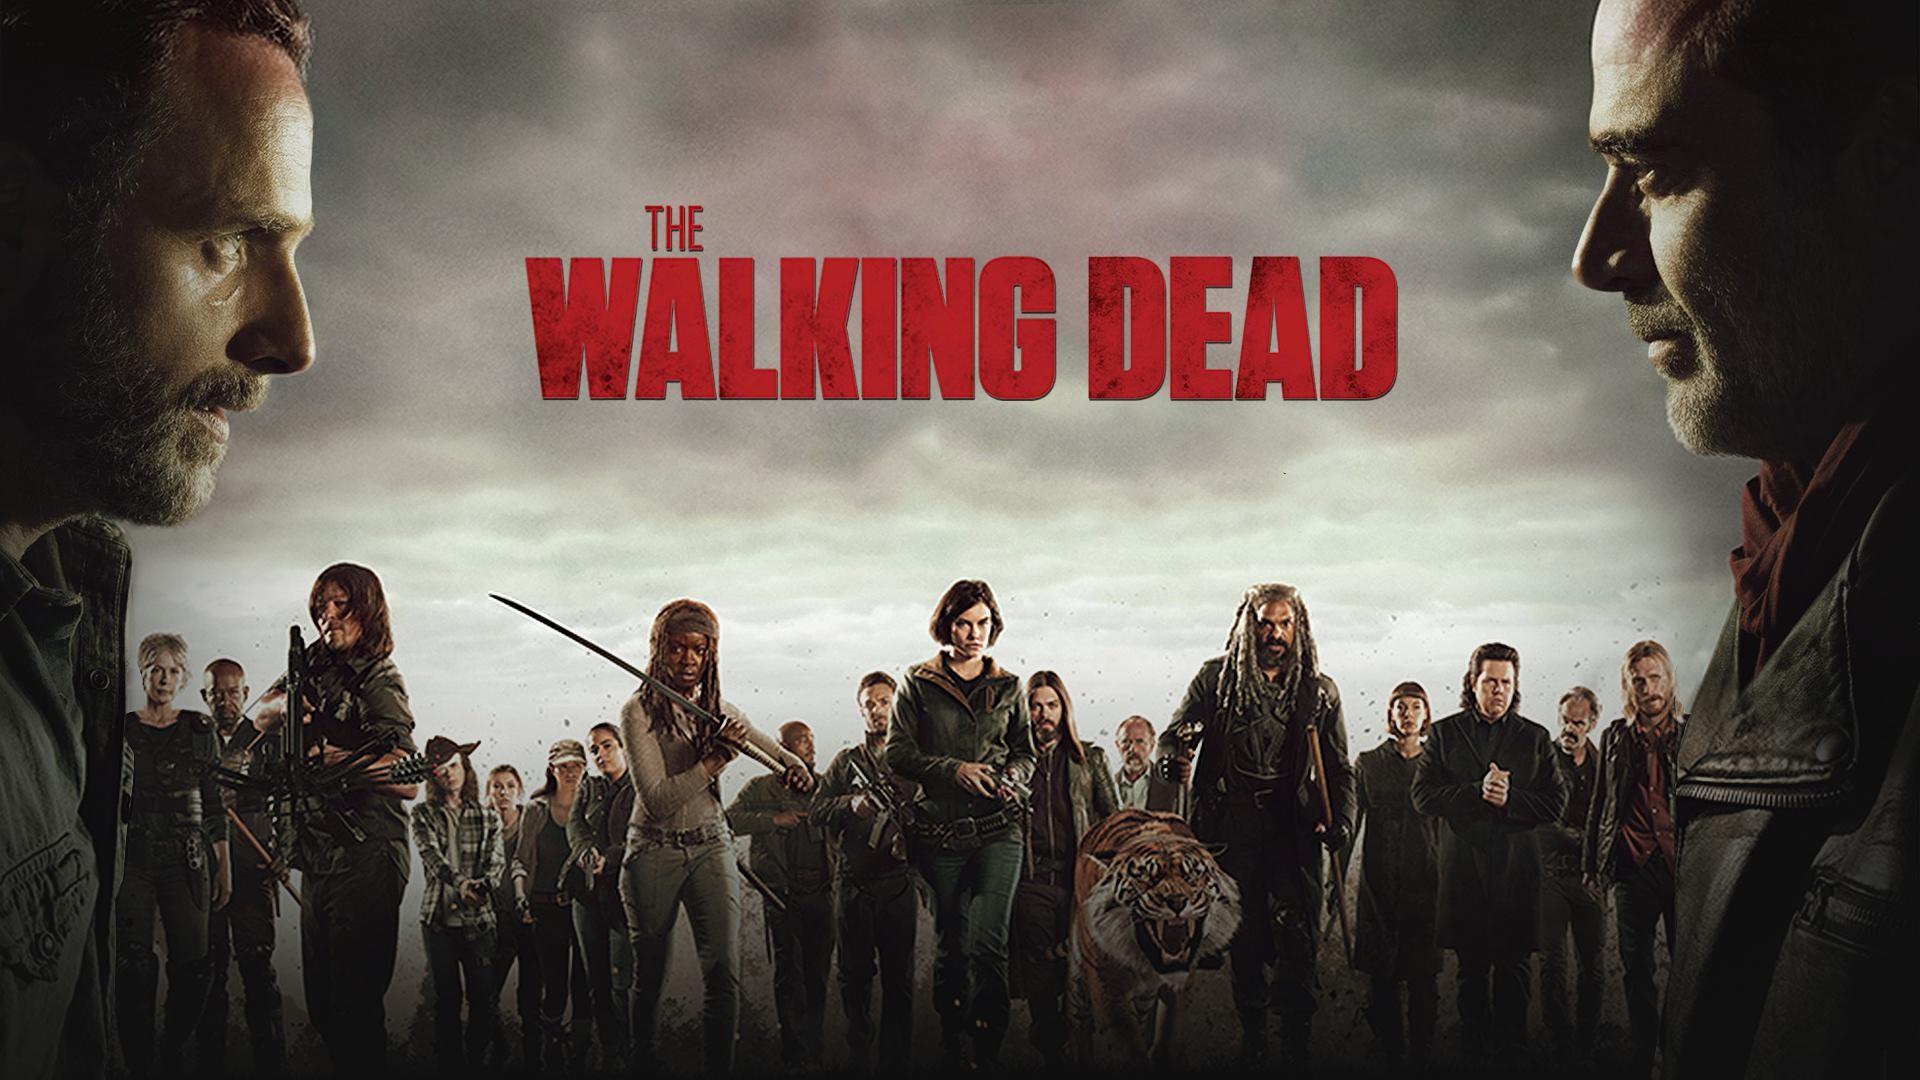 The Walking Dead Wallpaper background picture